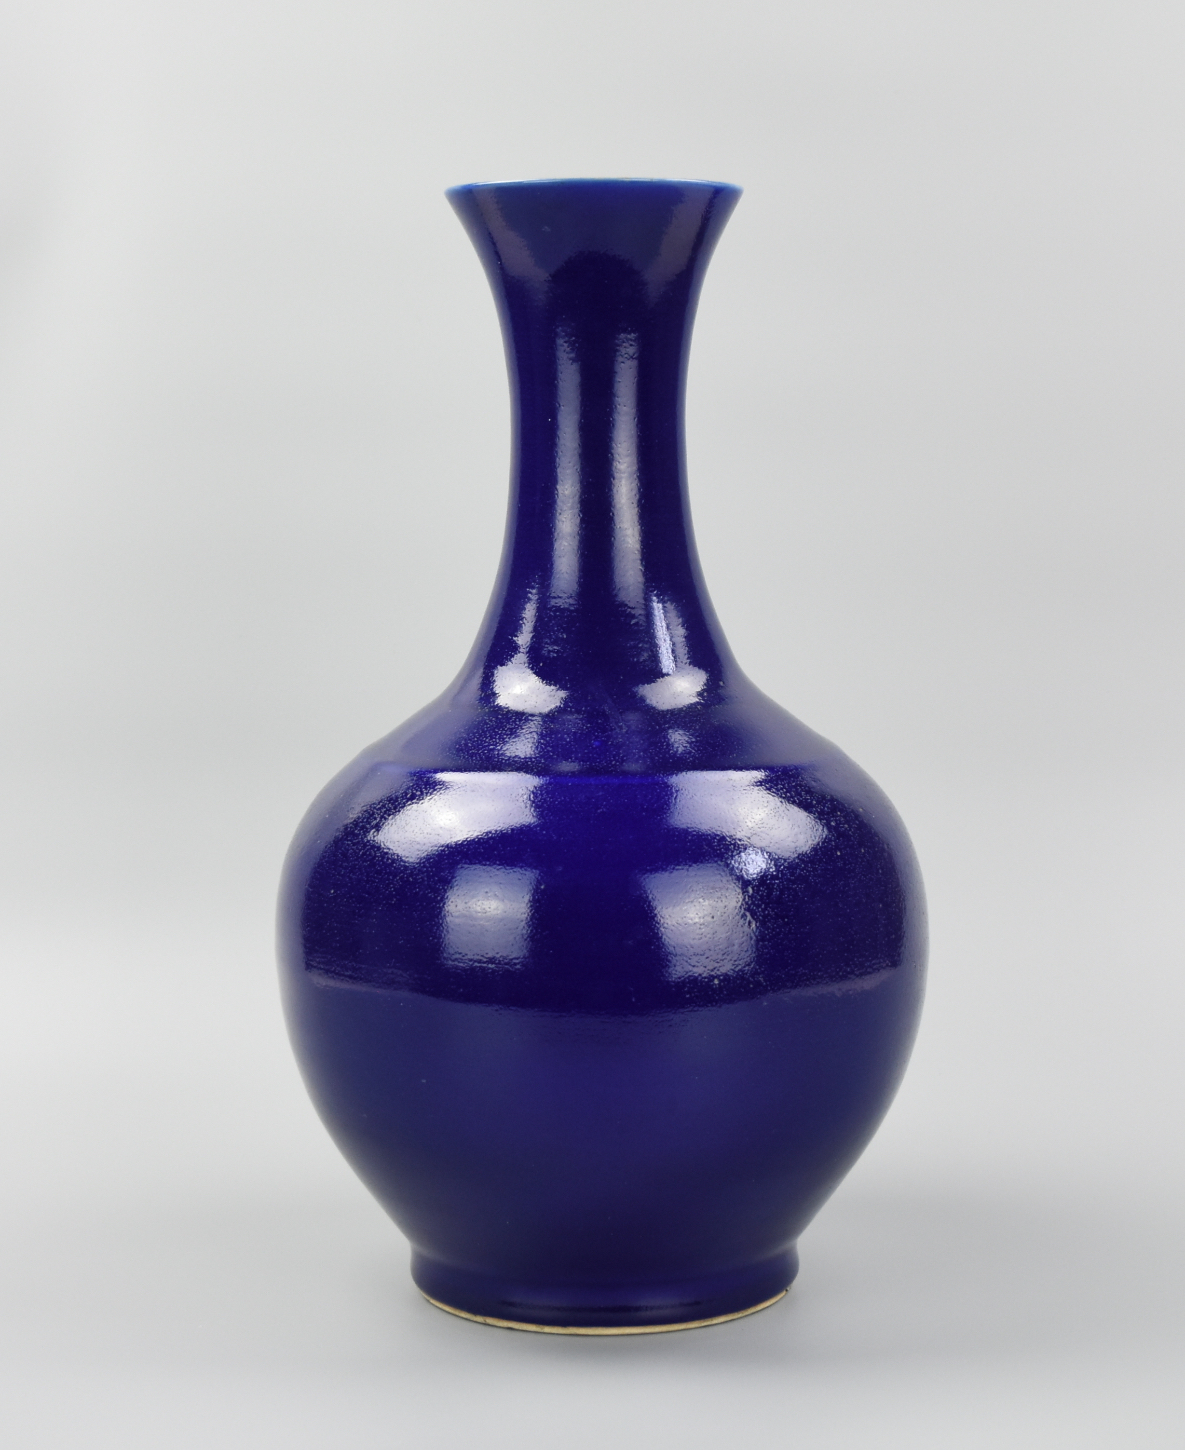 CHINESE PRUSSIAN BLUE GLAZED VASE,18TH